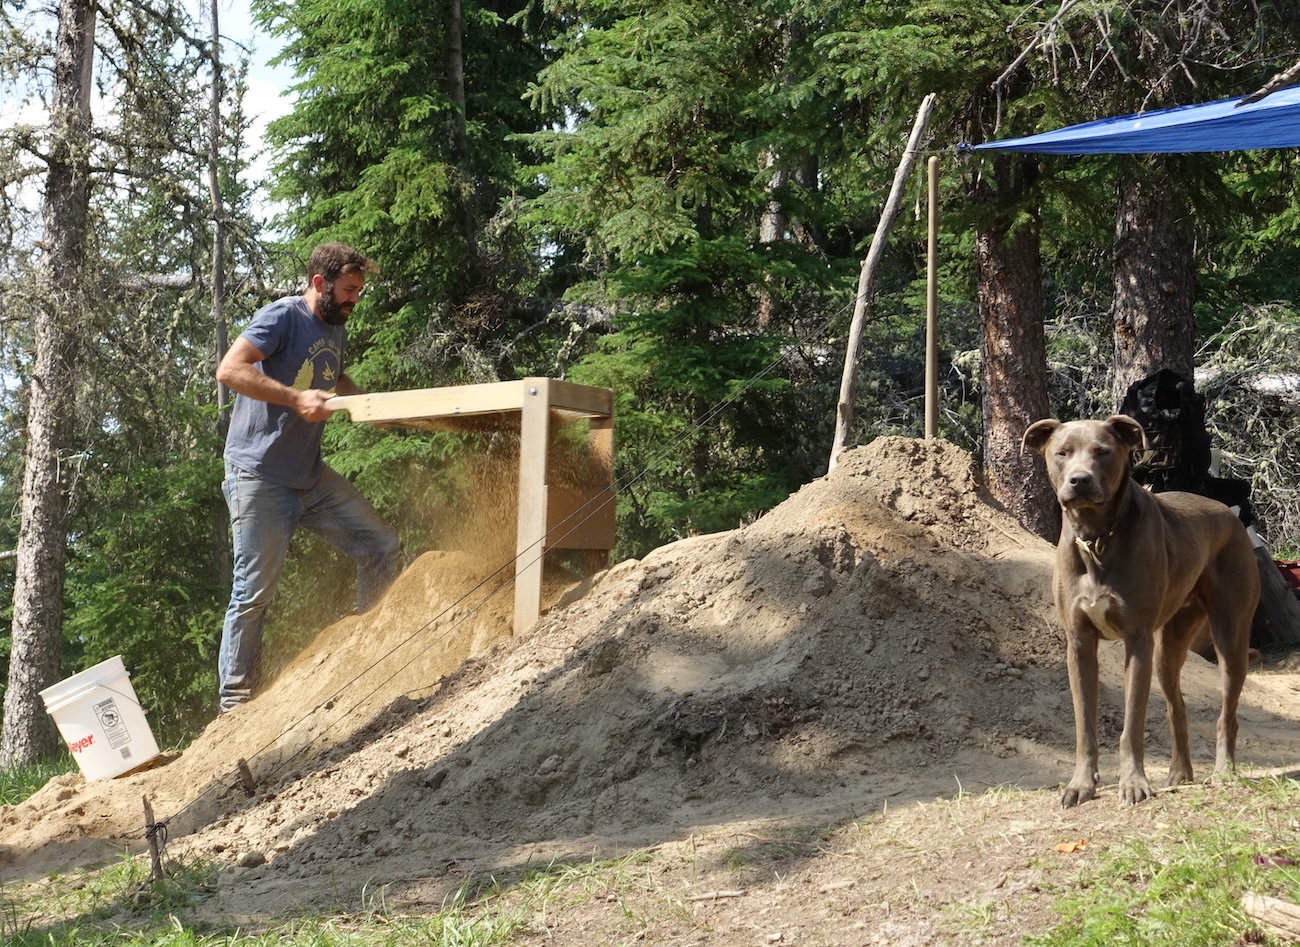 At left, a man in a blue shirt and jeans shakes a screen box, from which soil drops through onto a pile below. At right, a gray dog looks at the photographer. Spruce trees form the backdrop.